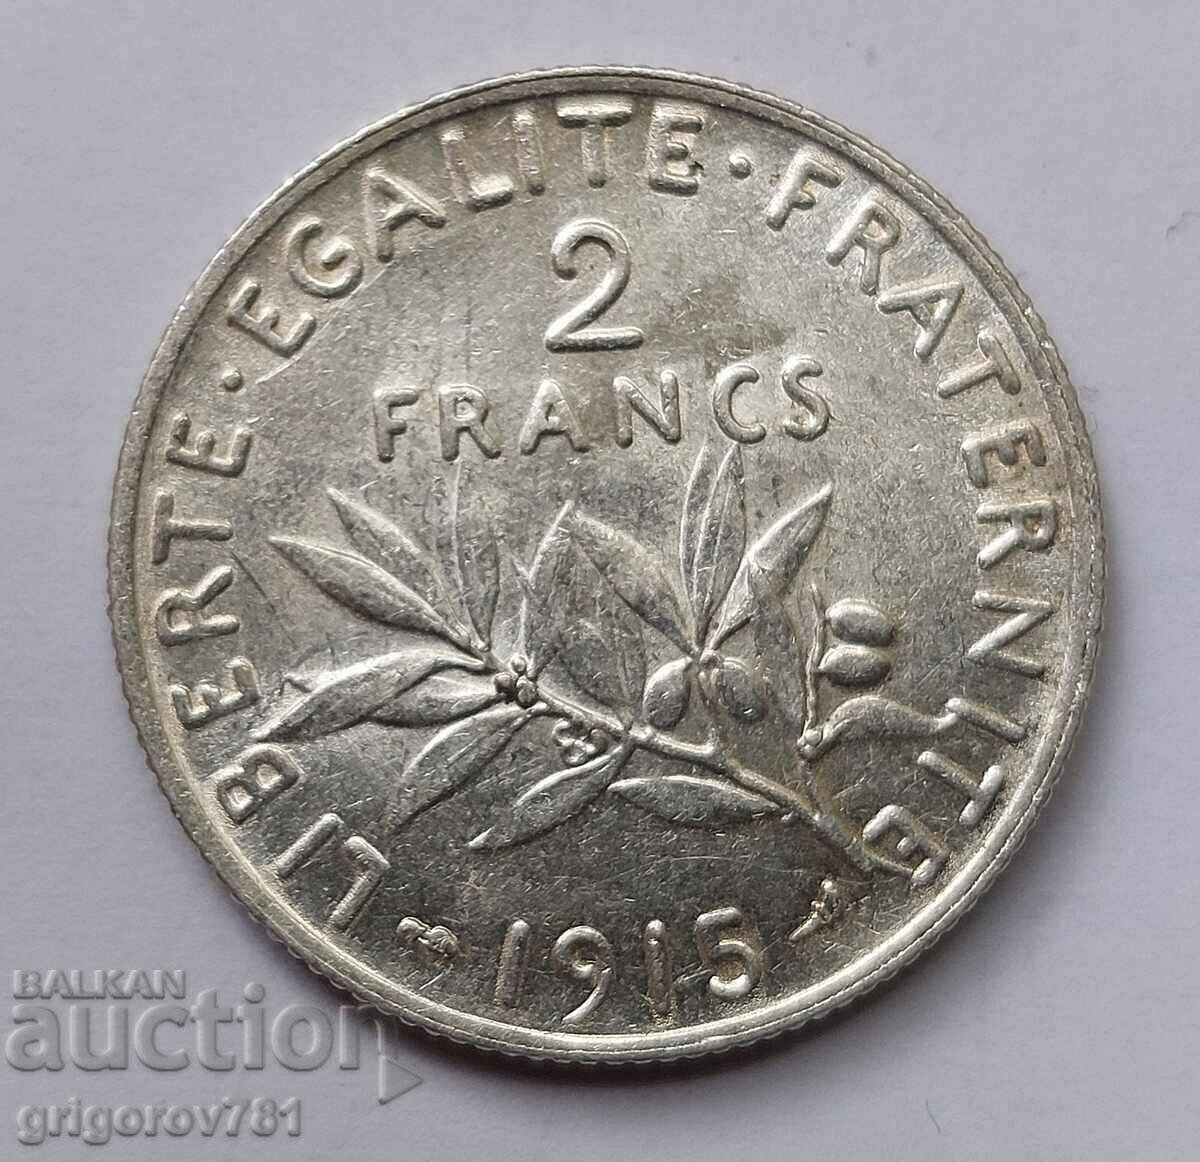 2 Francs Silver France 1915 - Silver Coin #76